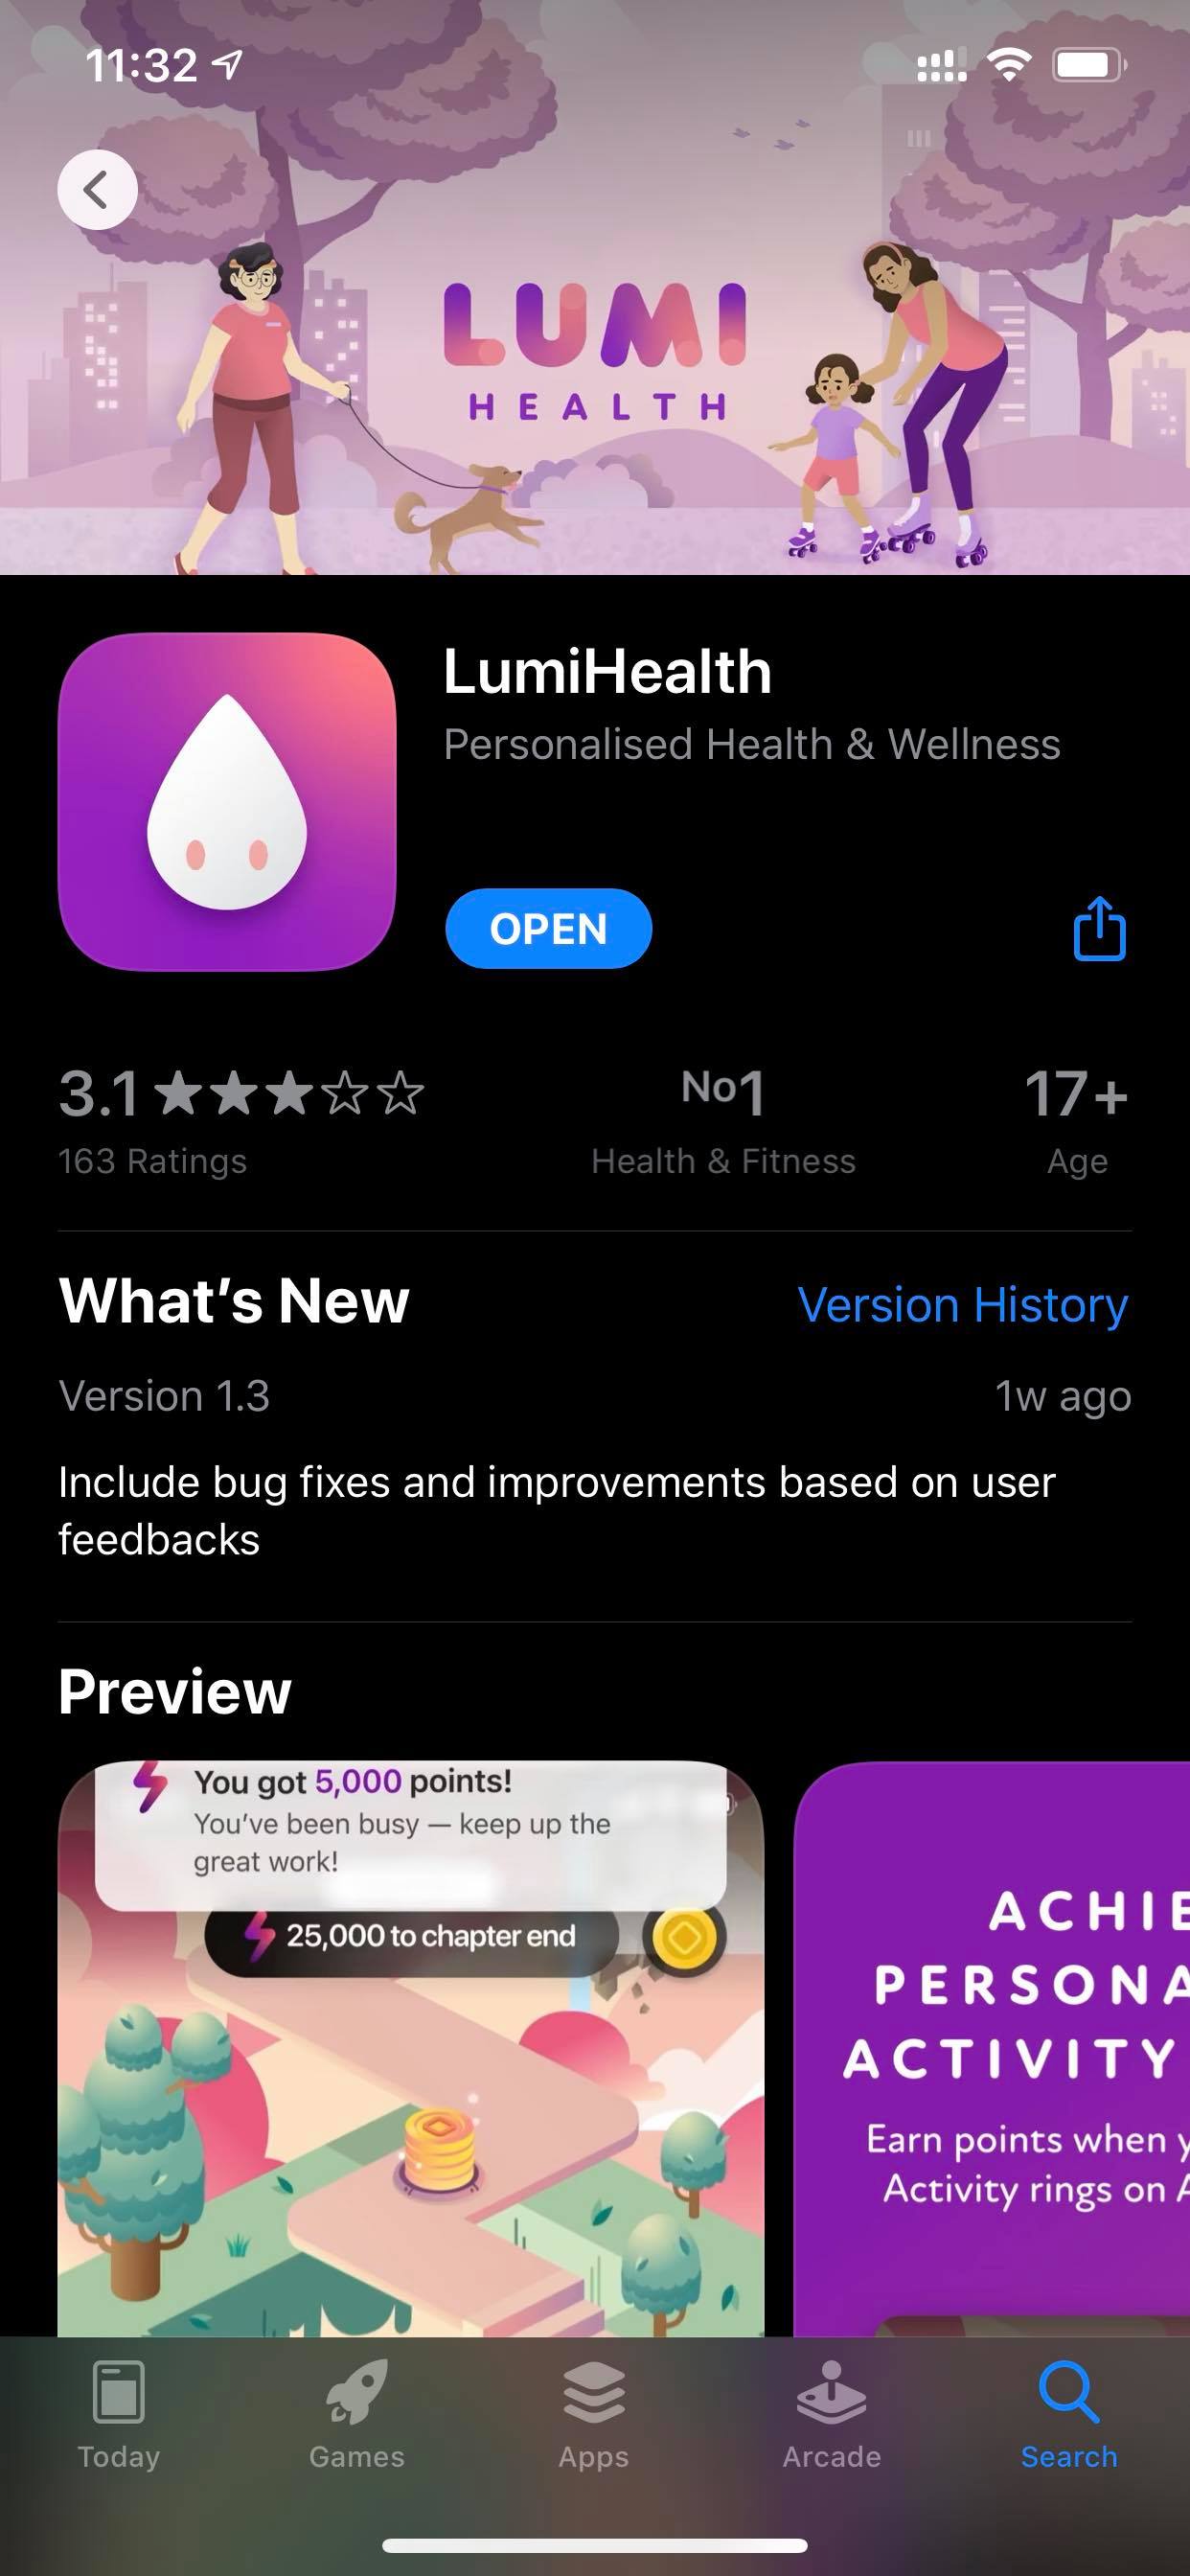 Apple and Health Promotion Board Partners Together to Get Everyone Moving with 
LumiHealth